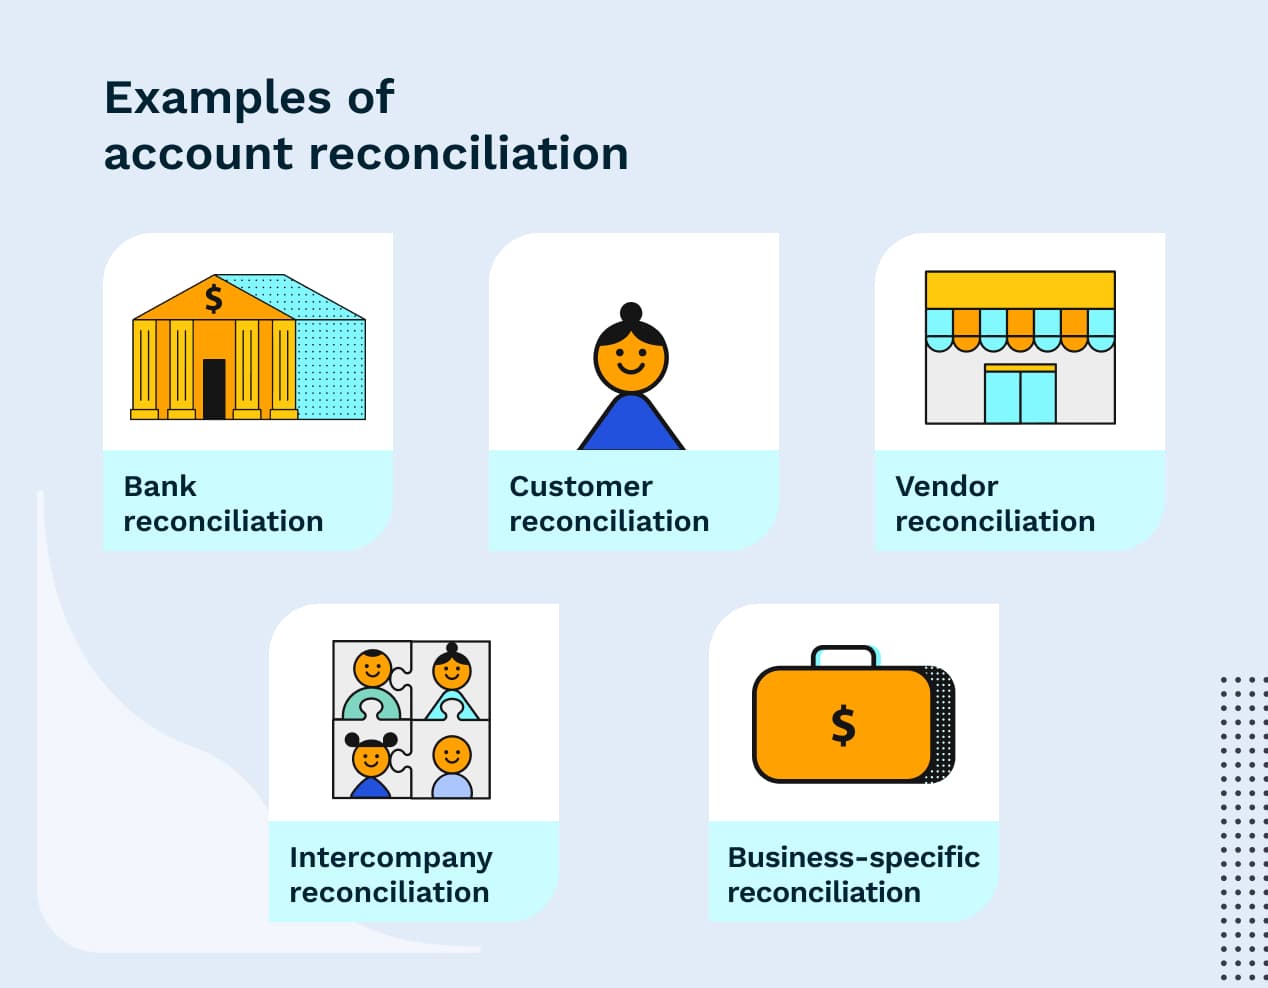 The 5 examples of account reconciliation